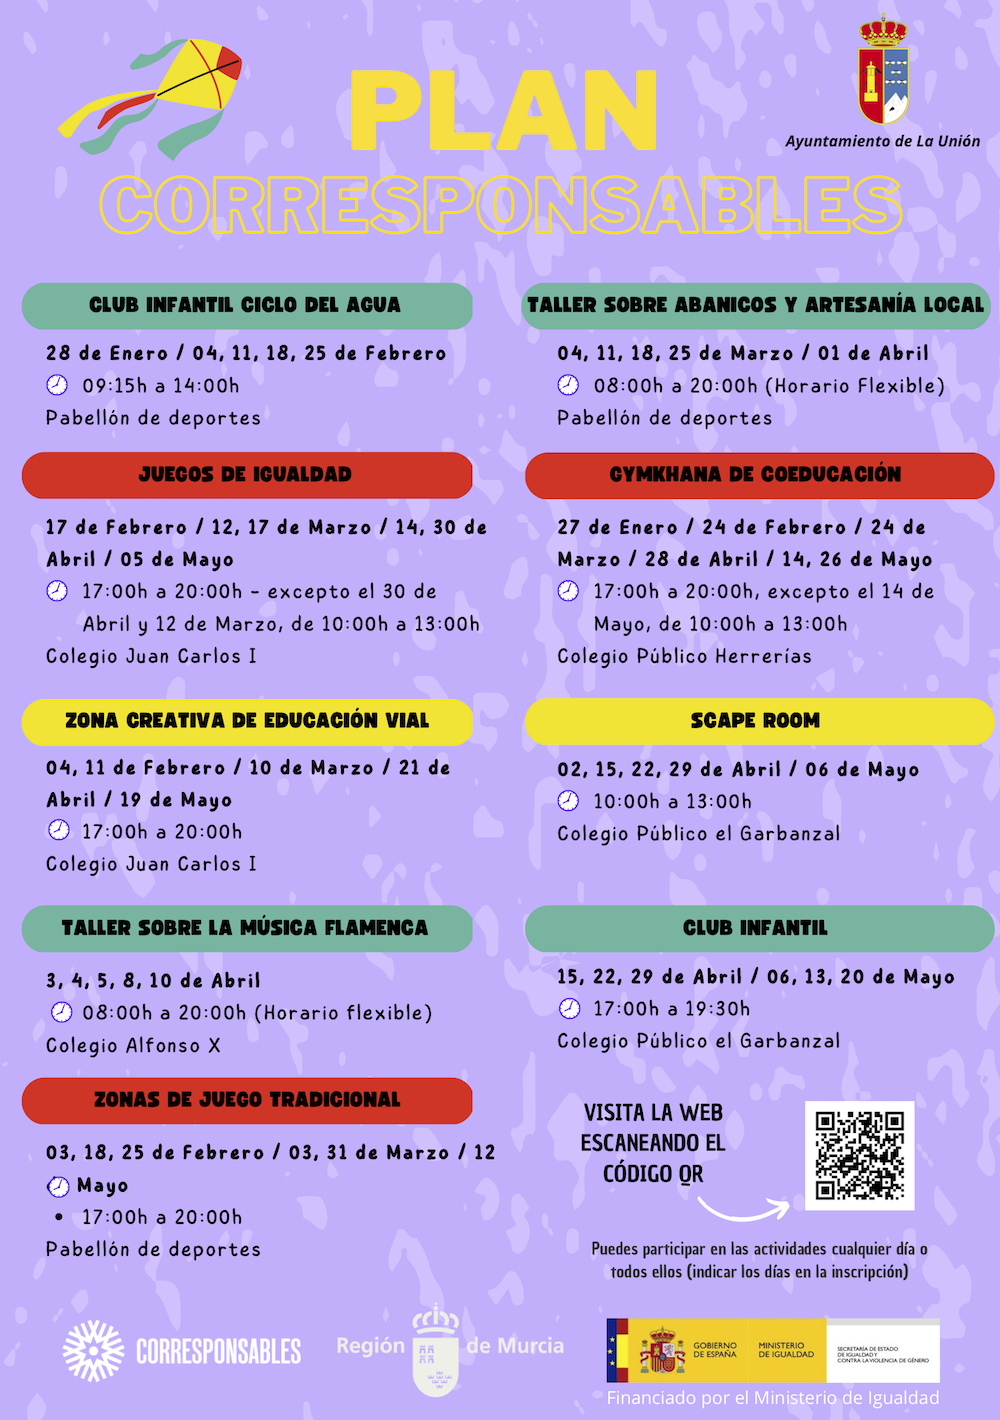 https://www.launiondehoy.com/images/banners/cartel_corresponsables.jpg